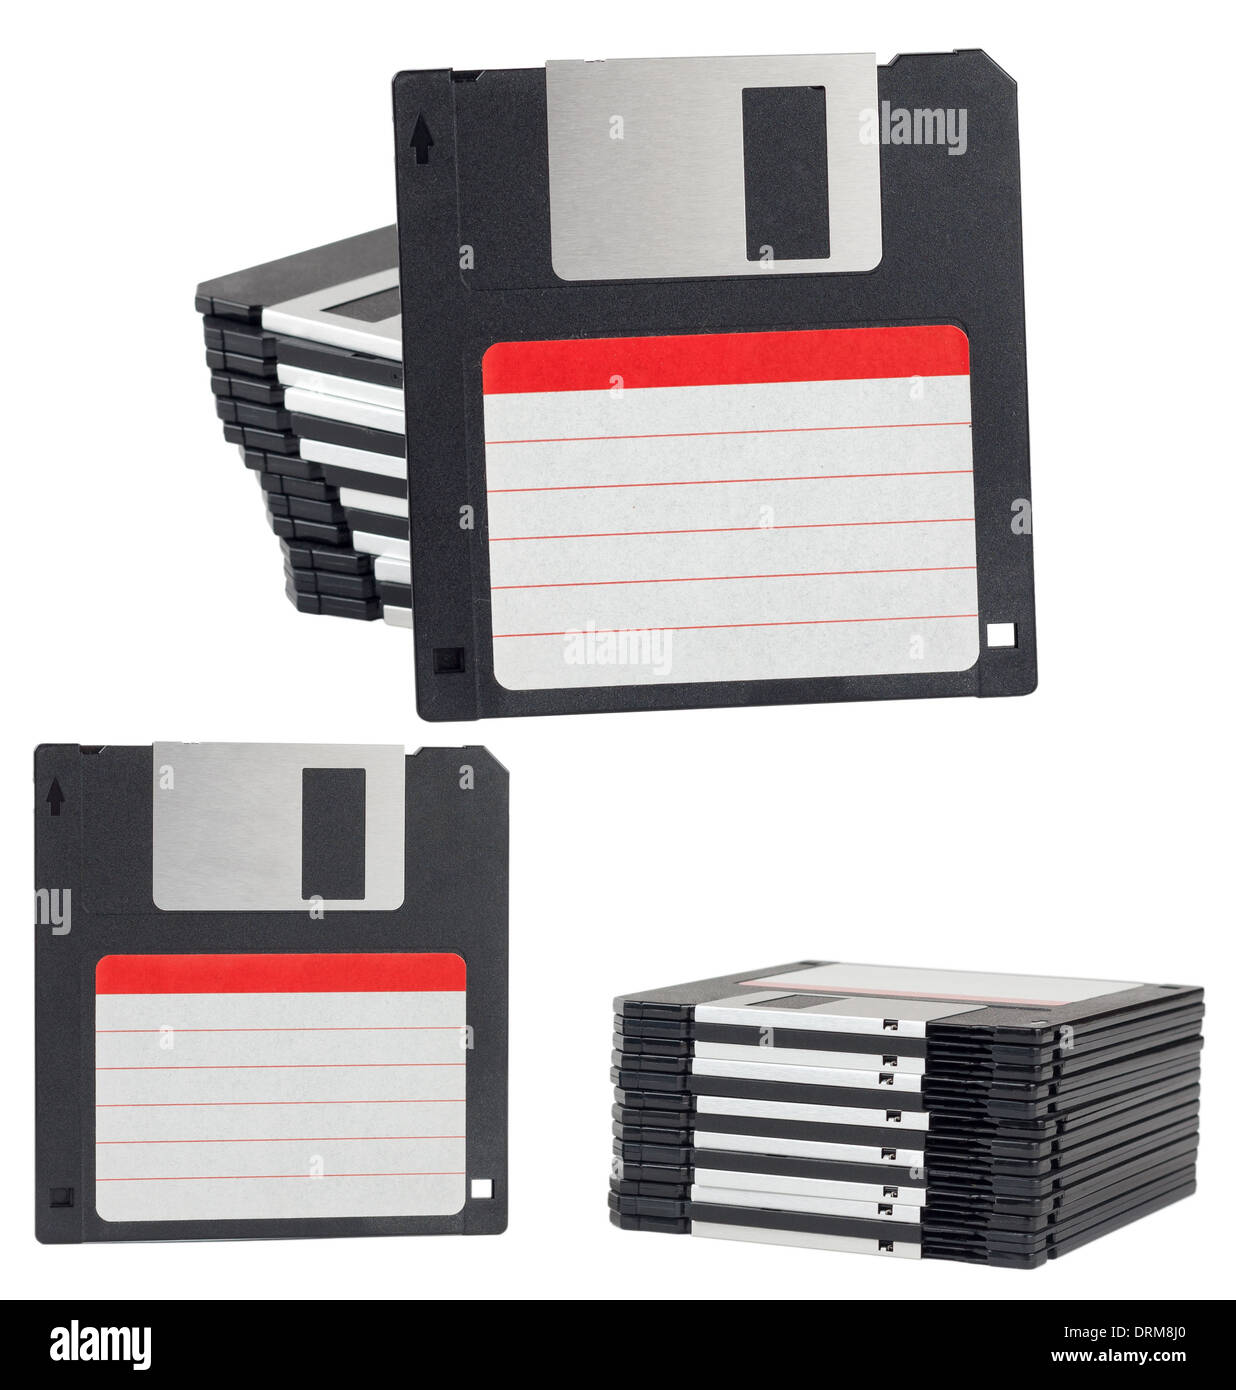 Isolated floppy disks with label Stock Photo